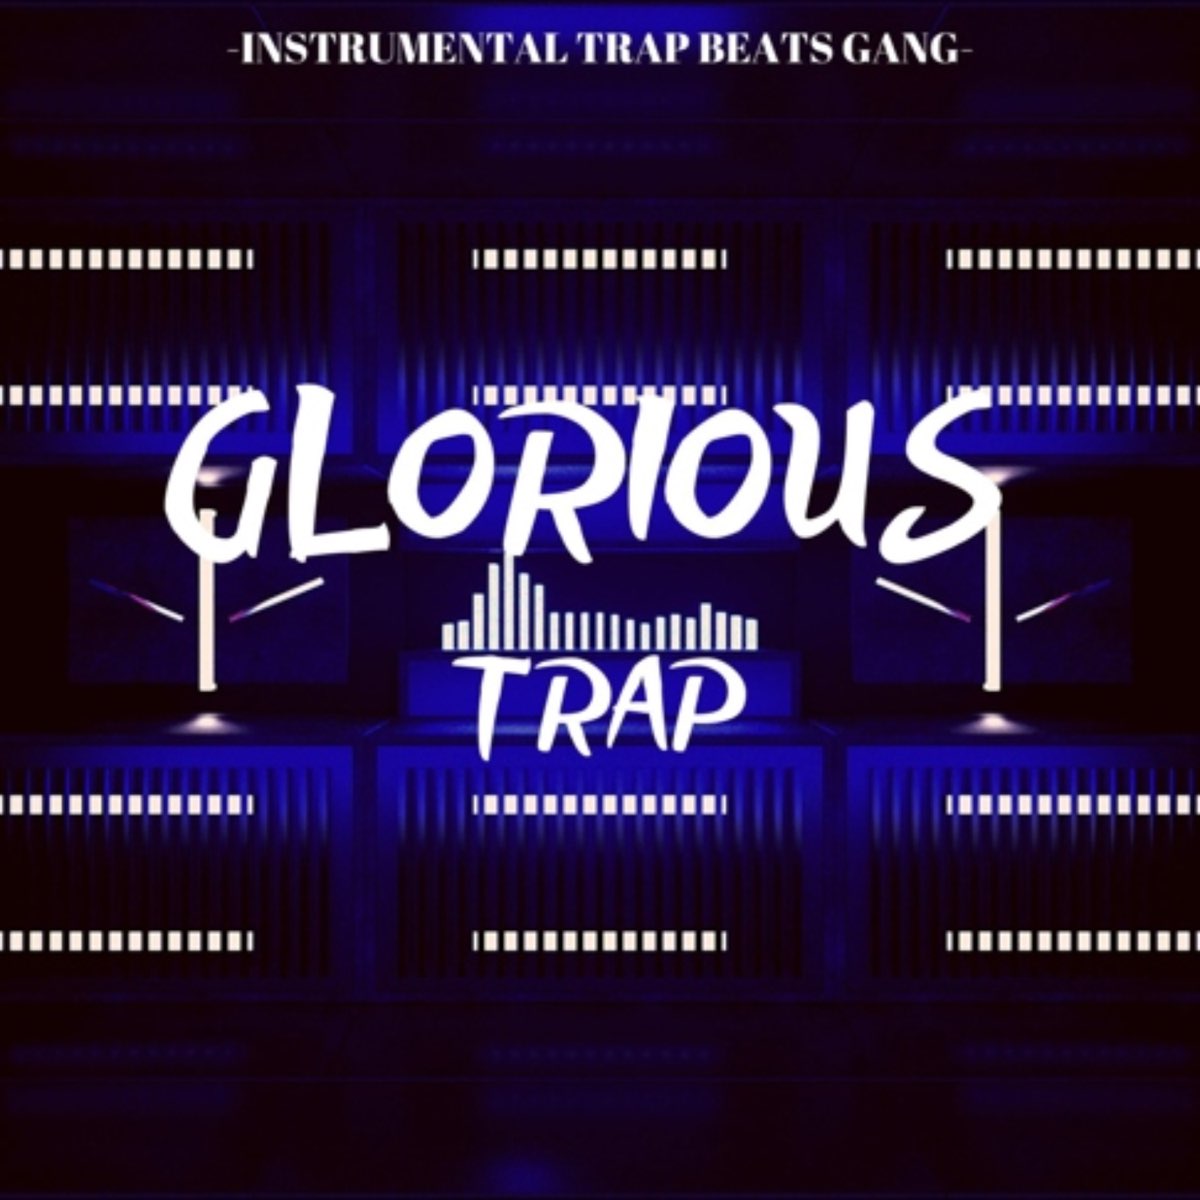 Glorious Trap by Instrumental Trap Beats Gang on Apple Music